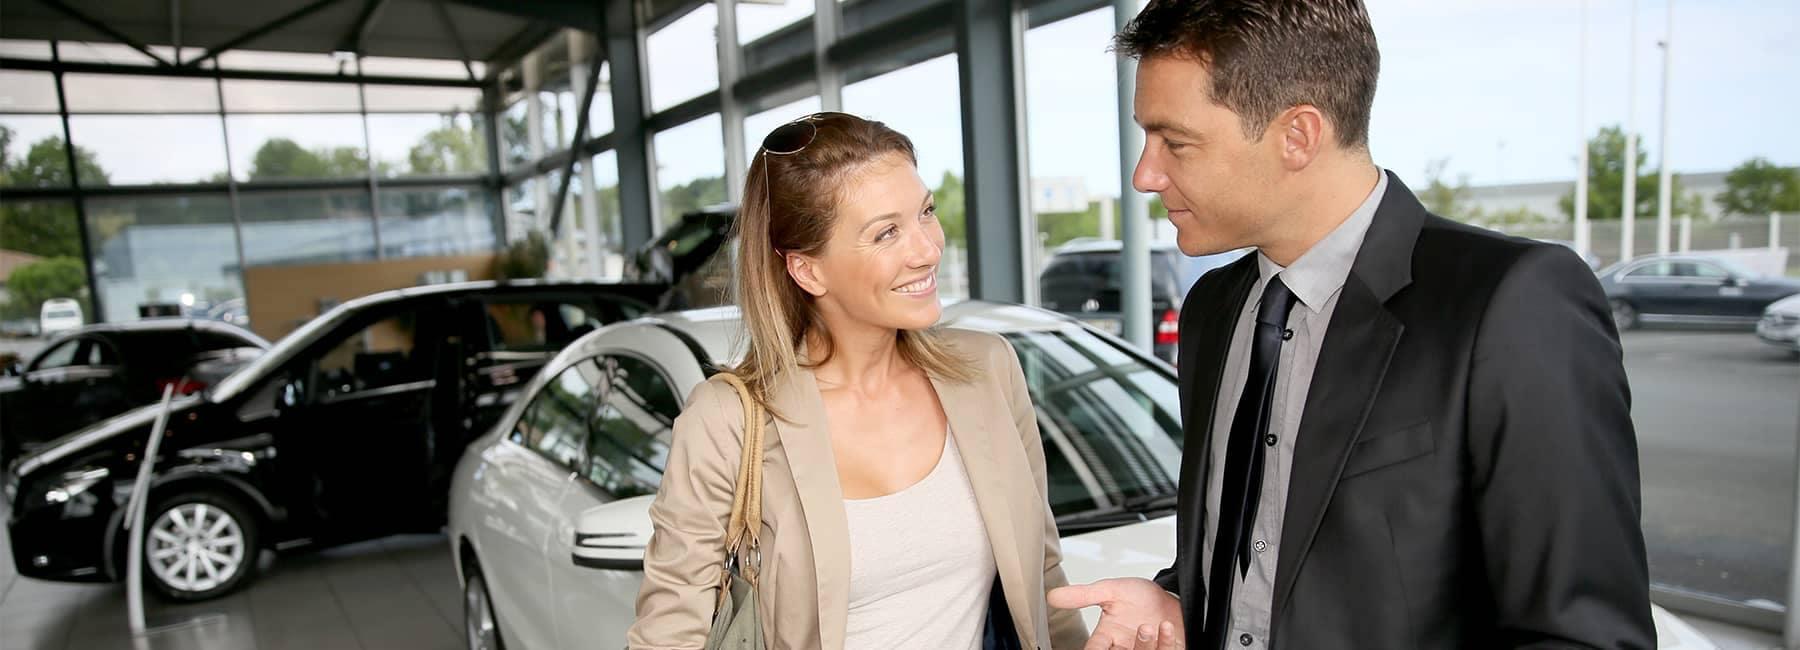 Car salesman discussing a car purchase with a female customer inside the showroom